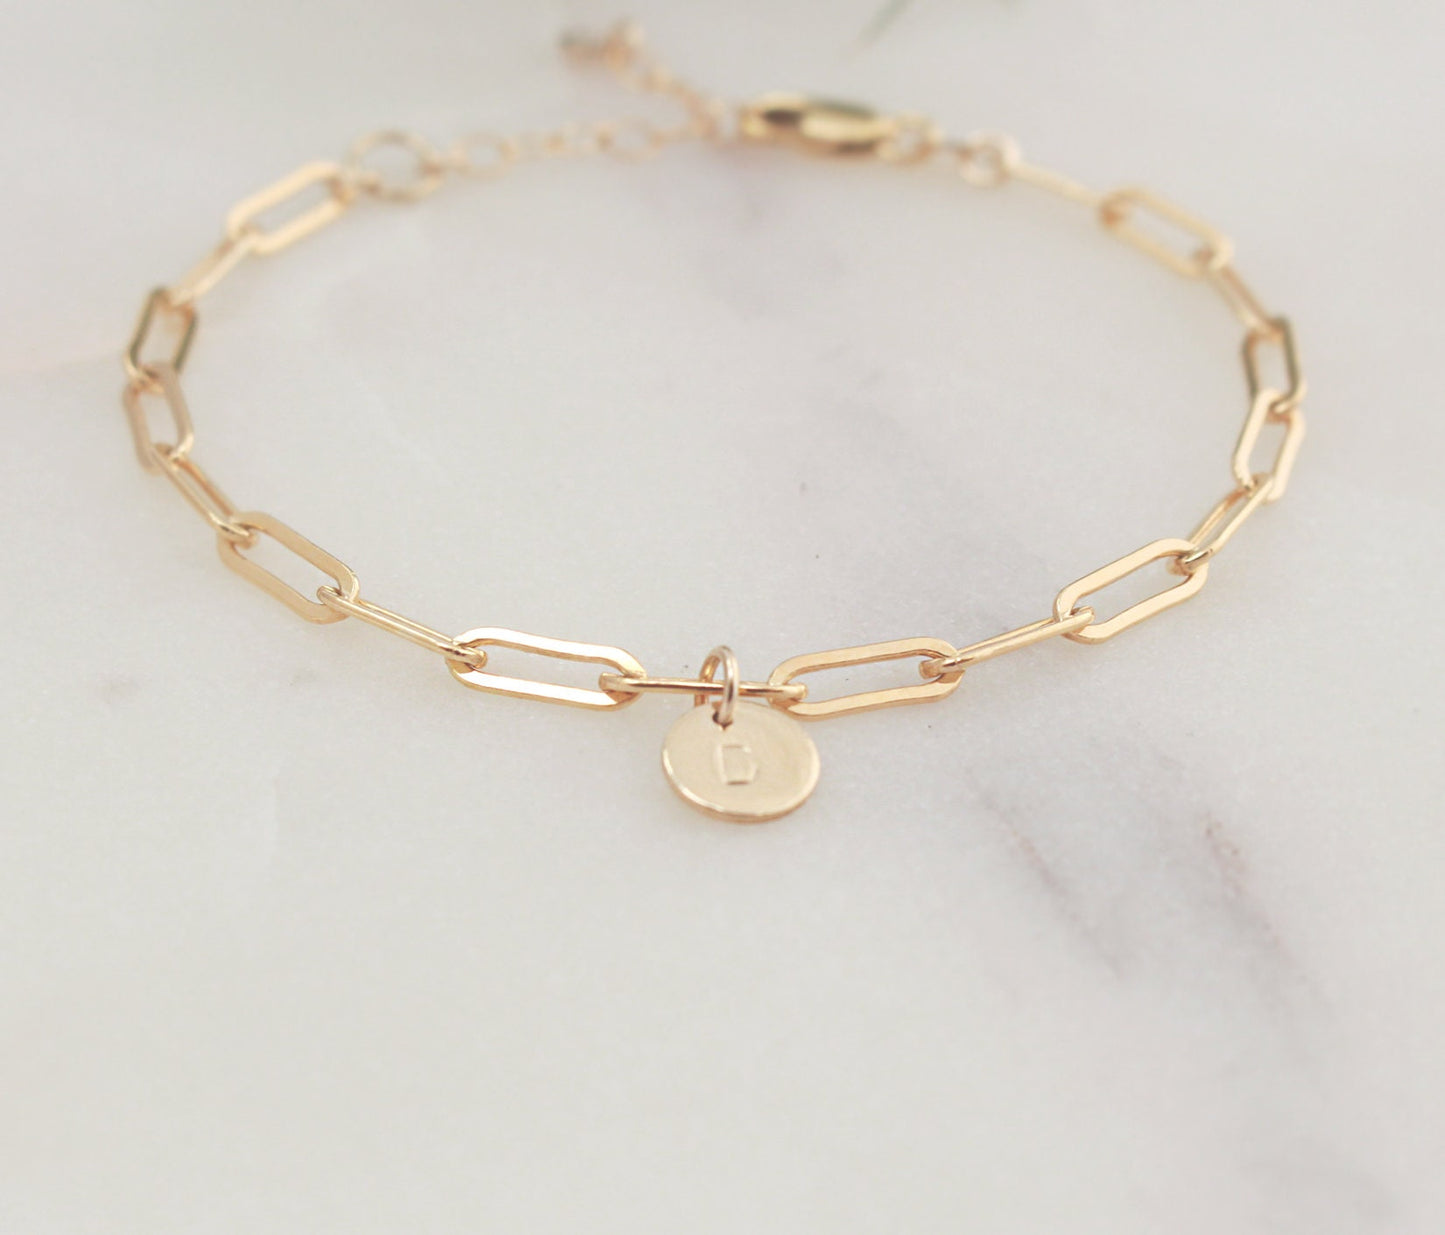 Initial Charm Bracelet -  Paperclip Chain (Small) - 14k Gold filled 3.4mm Elongated Chain, 6.4mm Round Initial Charm